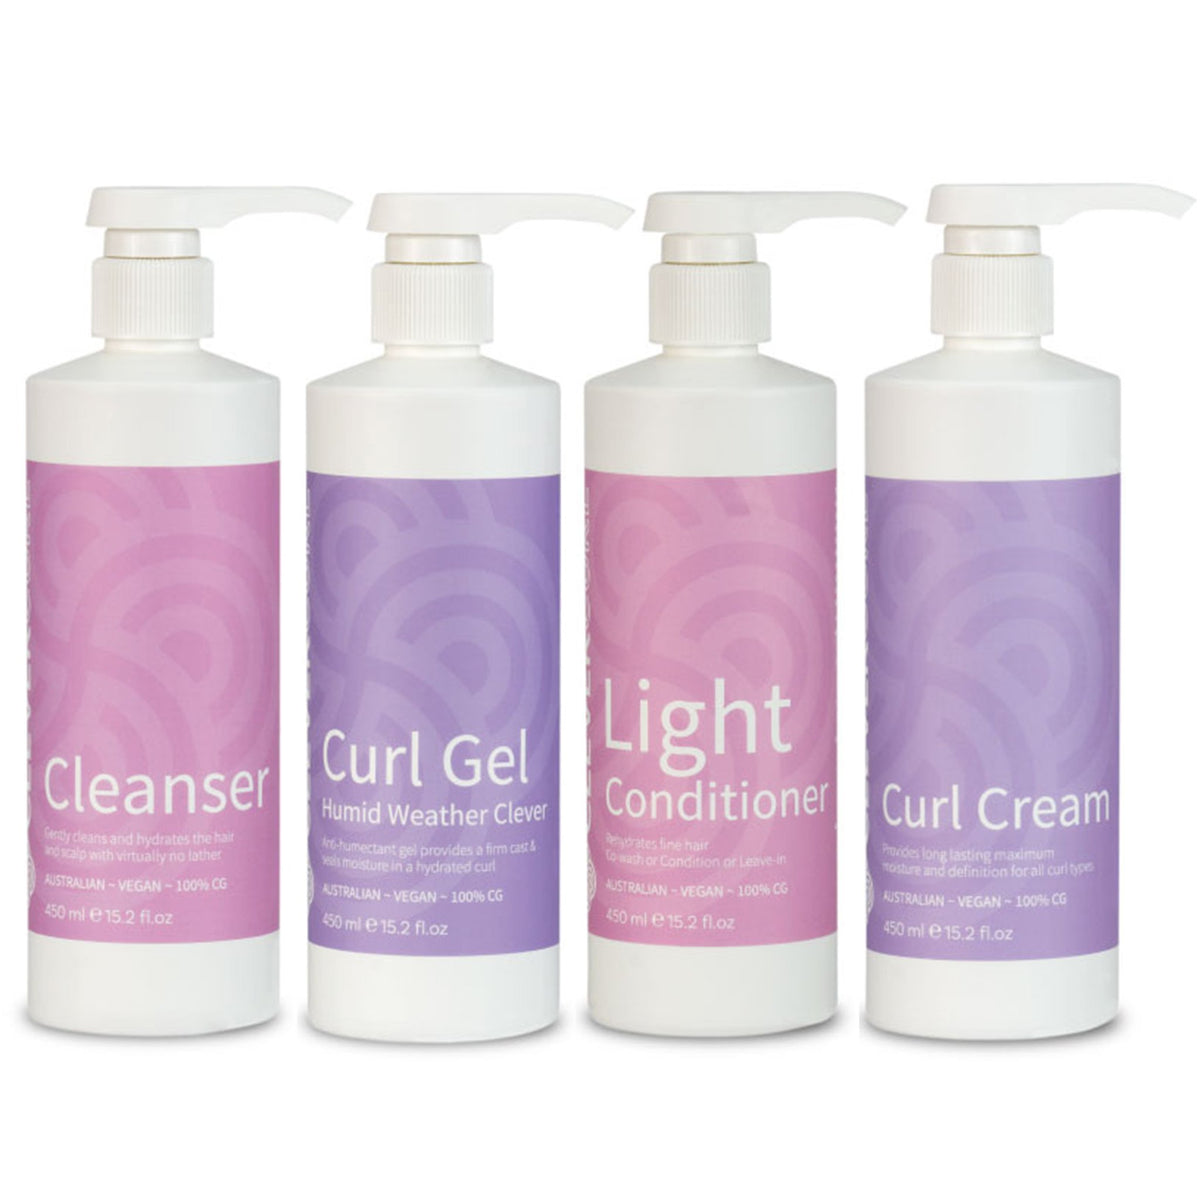 Clever Curl Cleanser, Humid Weather Gel, Light Conditioner and Curl Cream Quad - Haircare Superstore